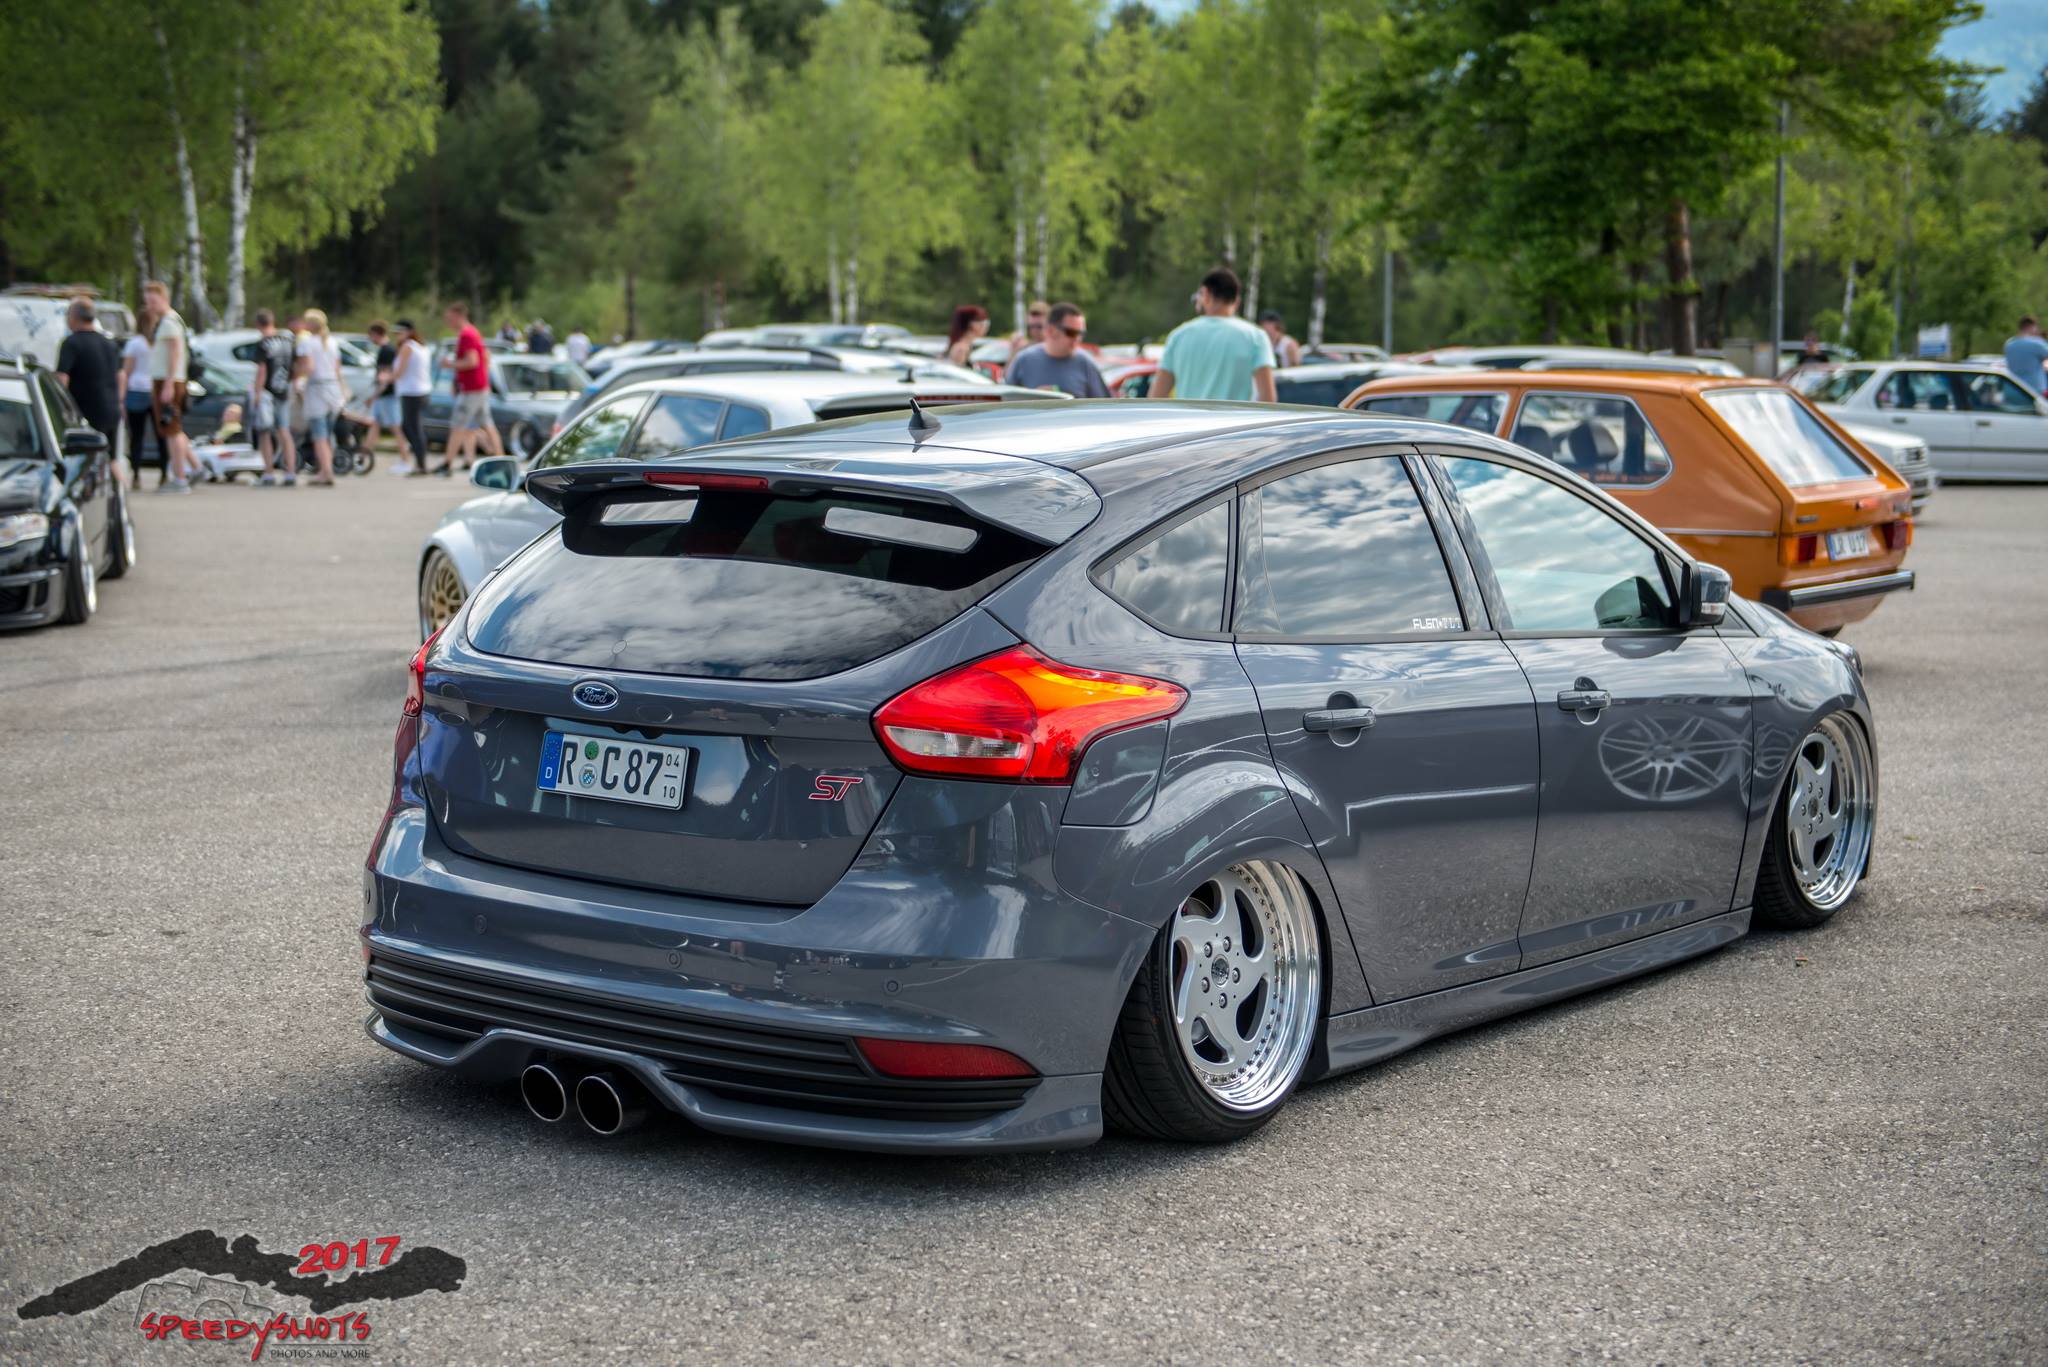 General 2048x1367 tuning car Ford Focus ST car meets Ford British cars hatchbacks stanced